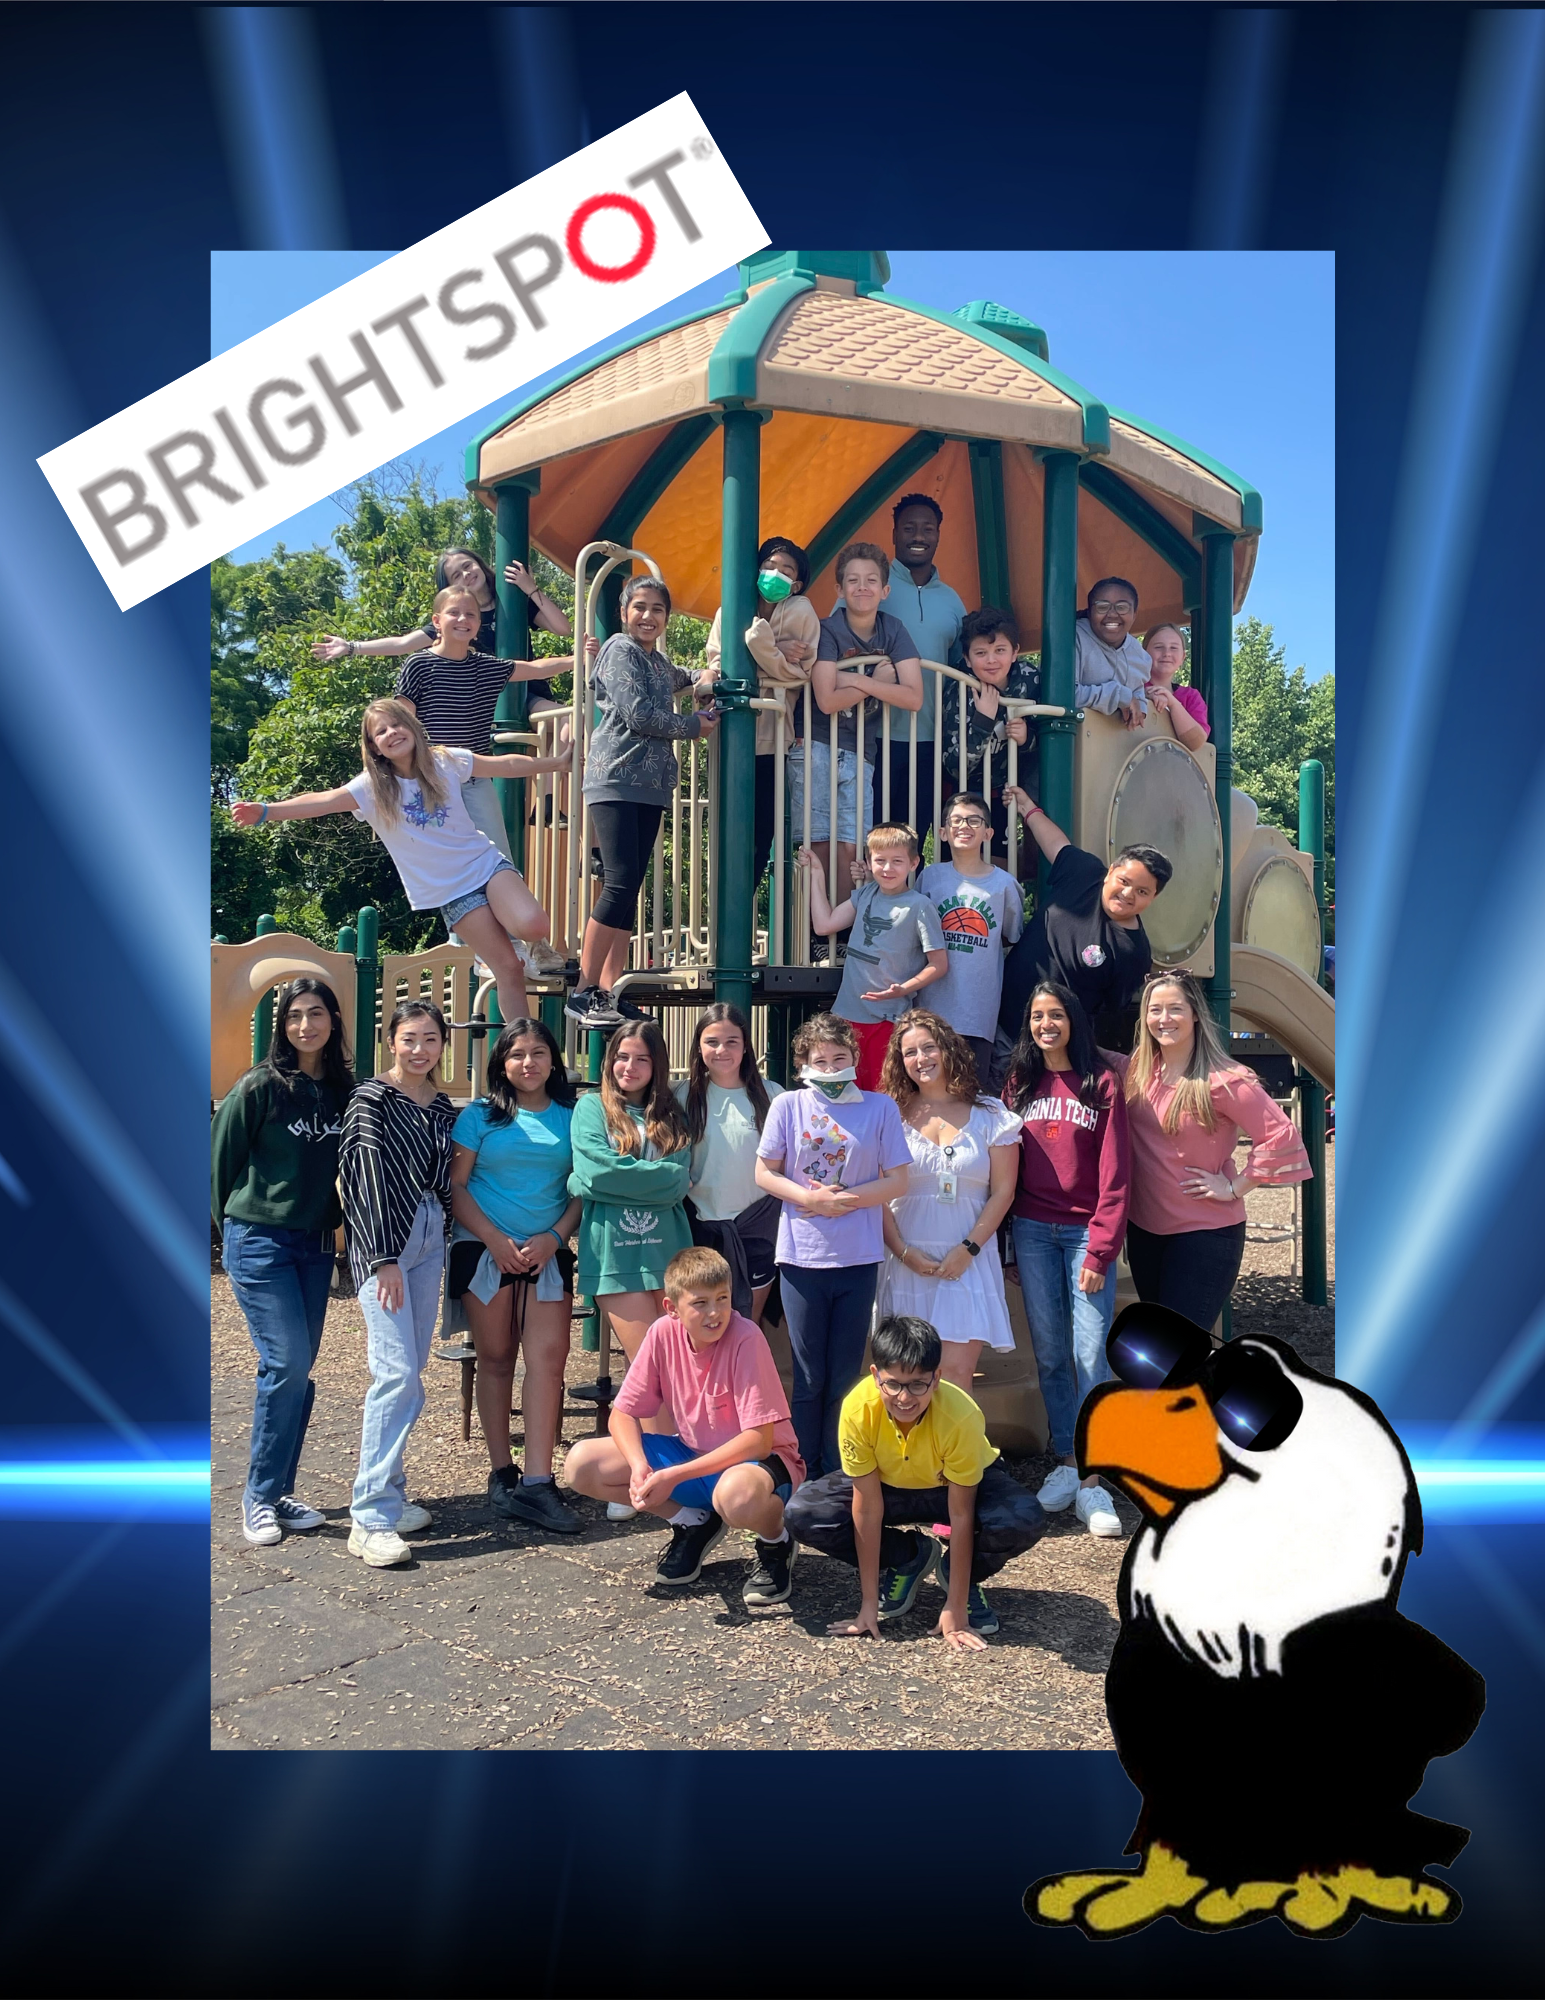 group photo of Brightspot mentors and students on the playground